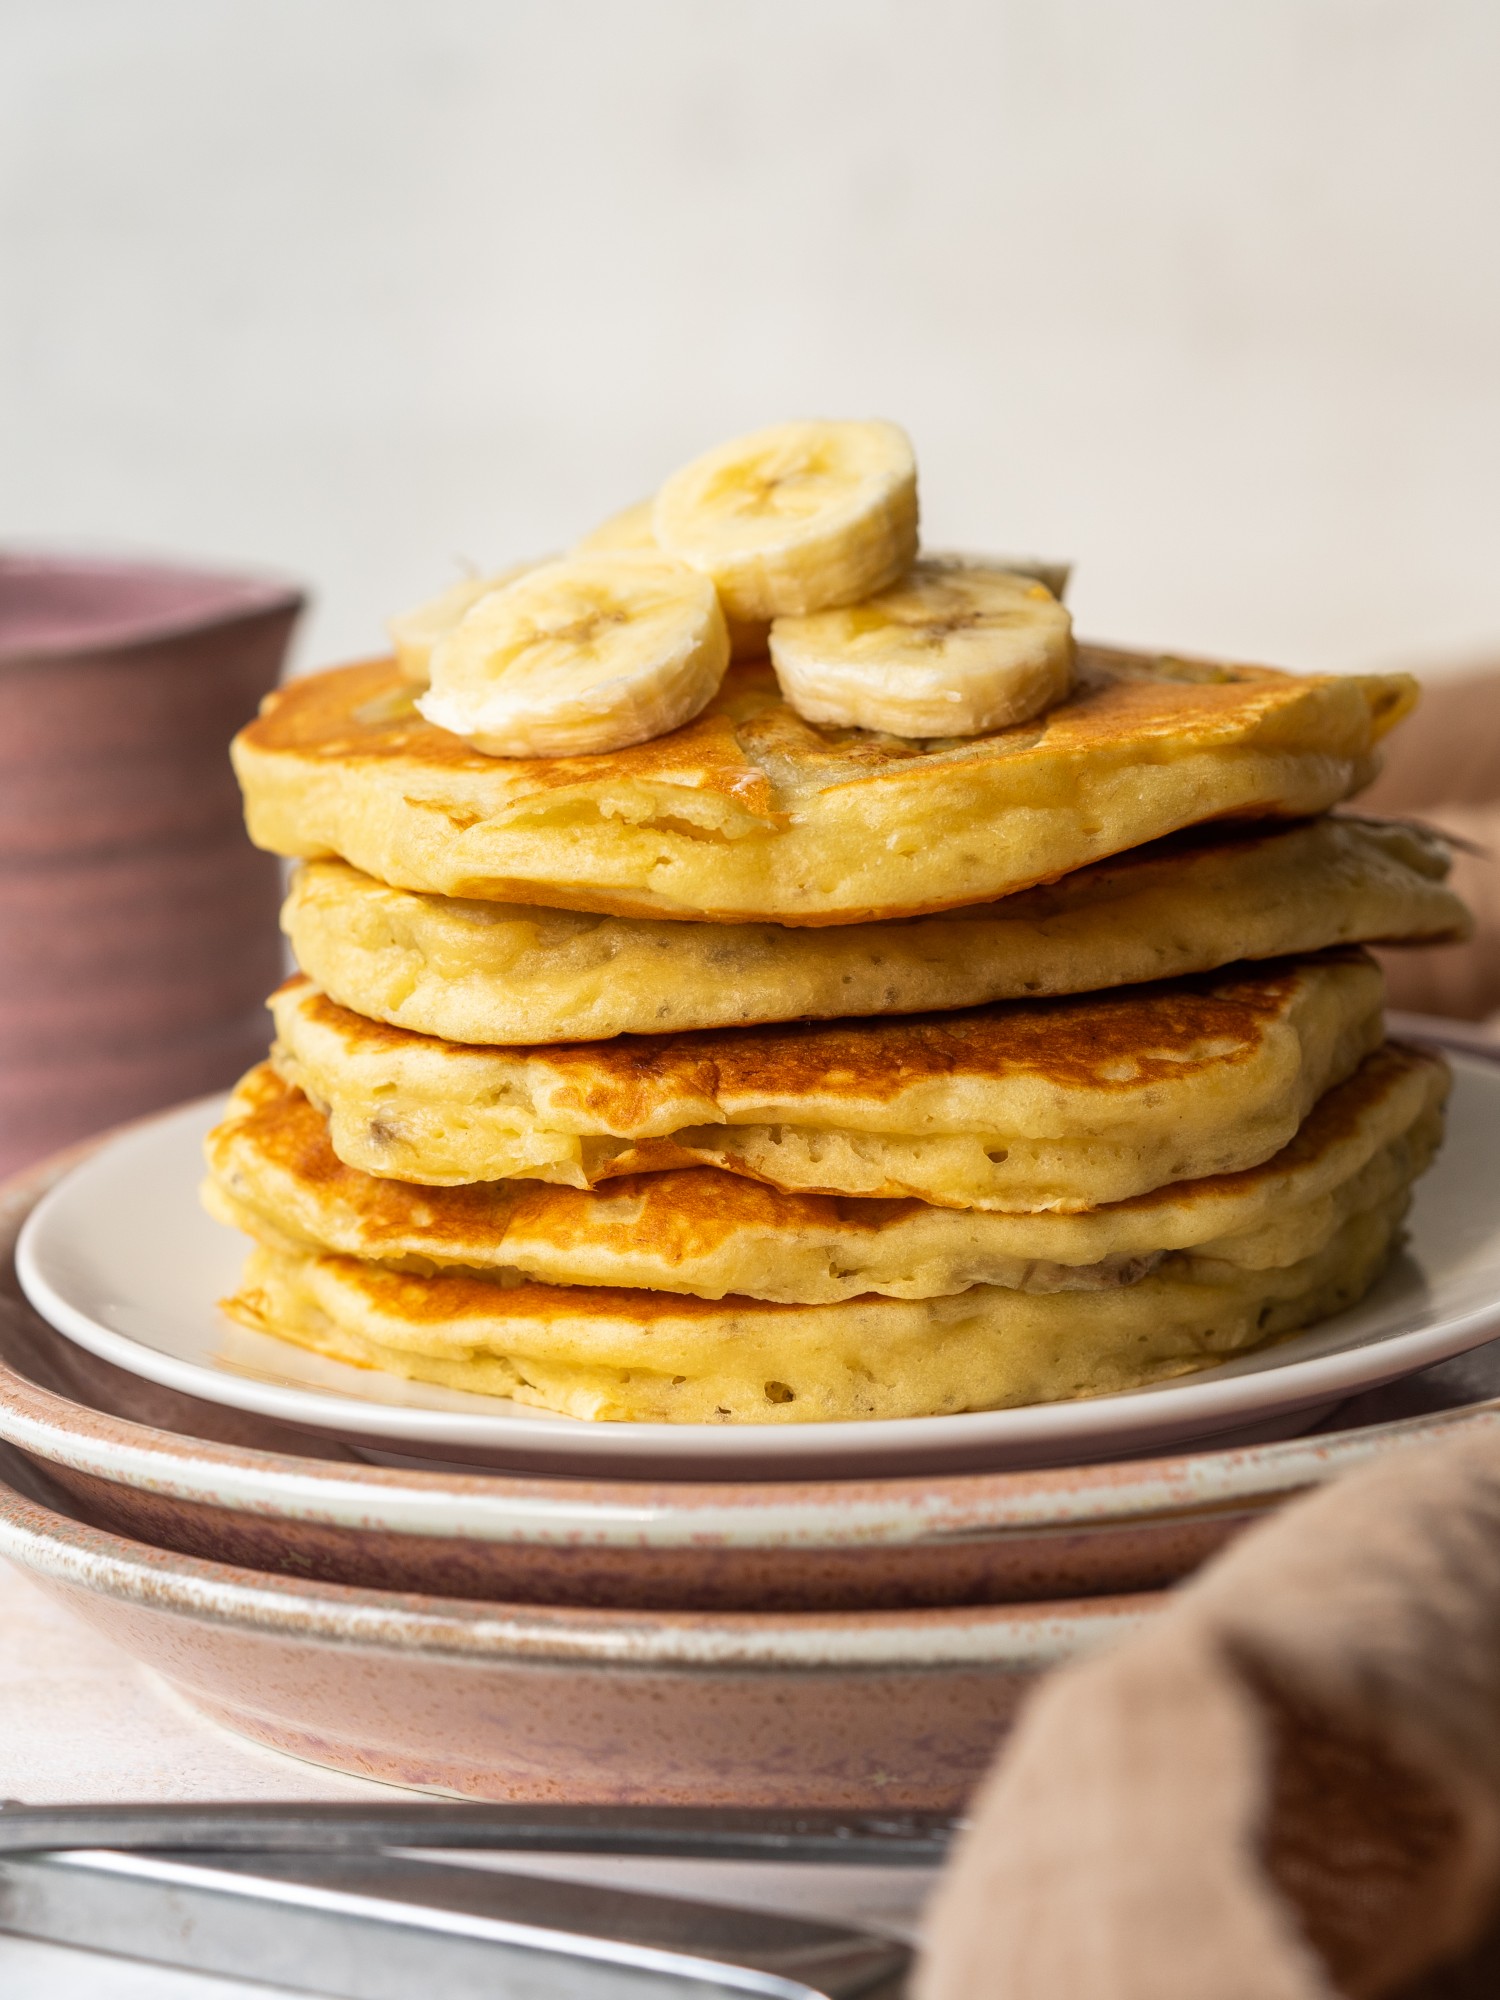 Side view of a stack of banana pancakes made with mashed bananas